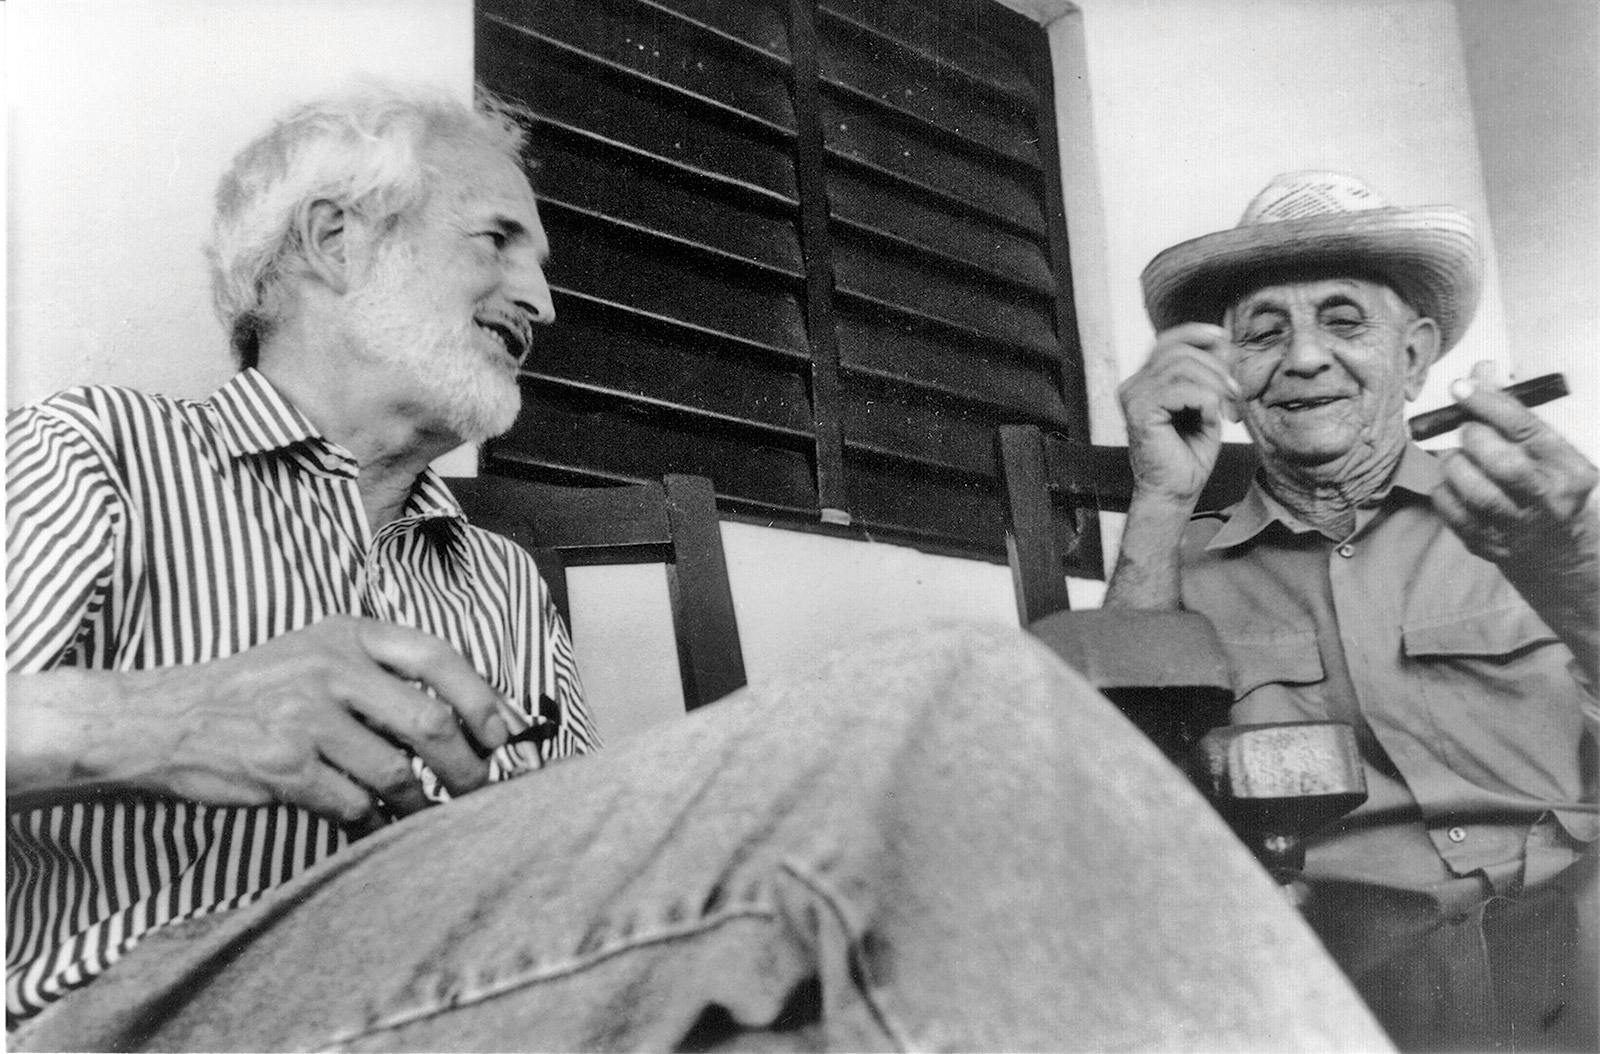 Villiger with legendary grower Alejandro Robaina on the porch of his Cuban farmhouse.